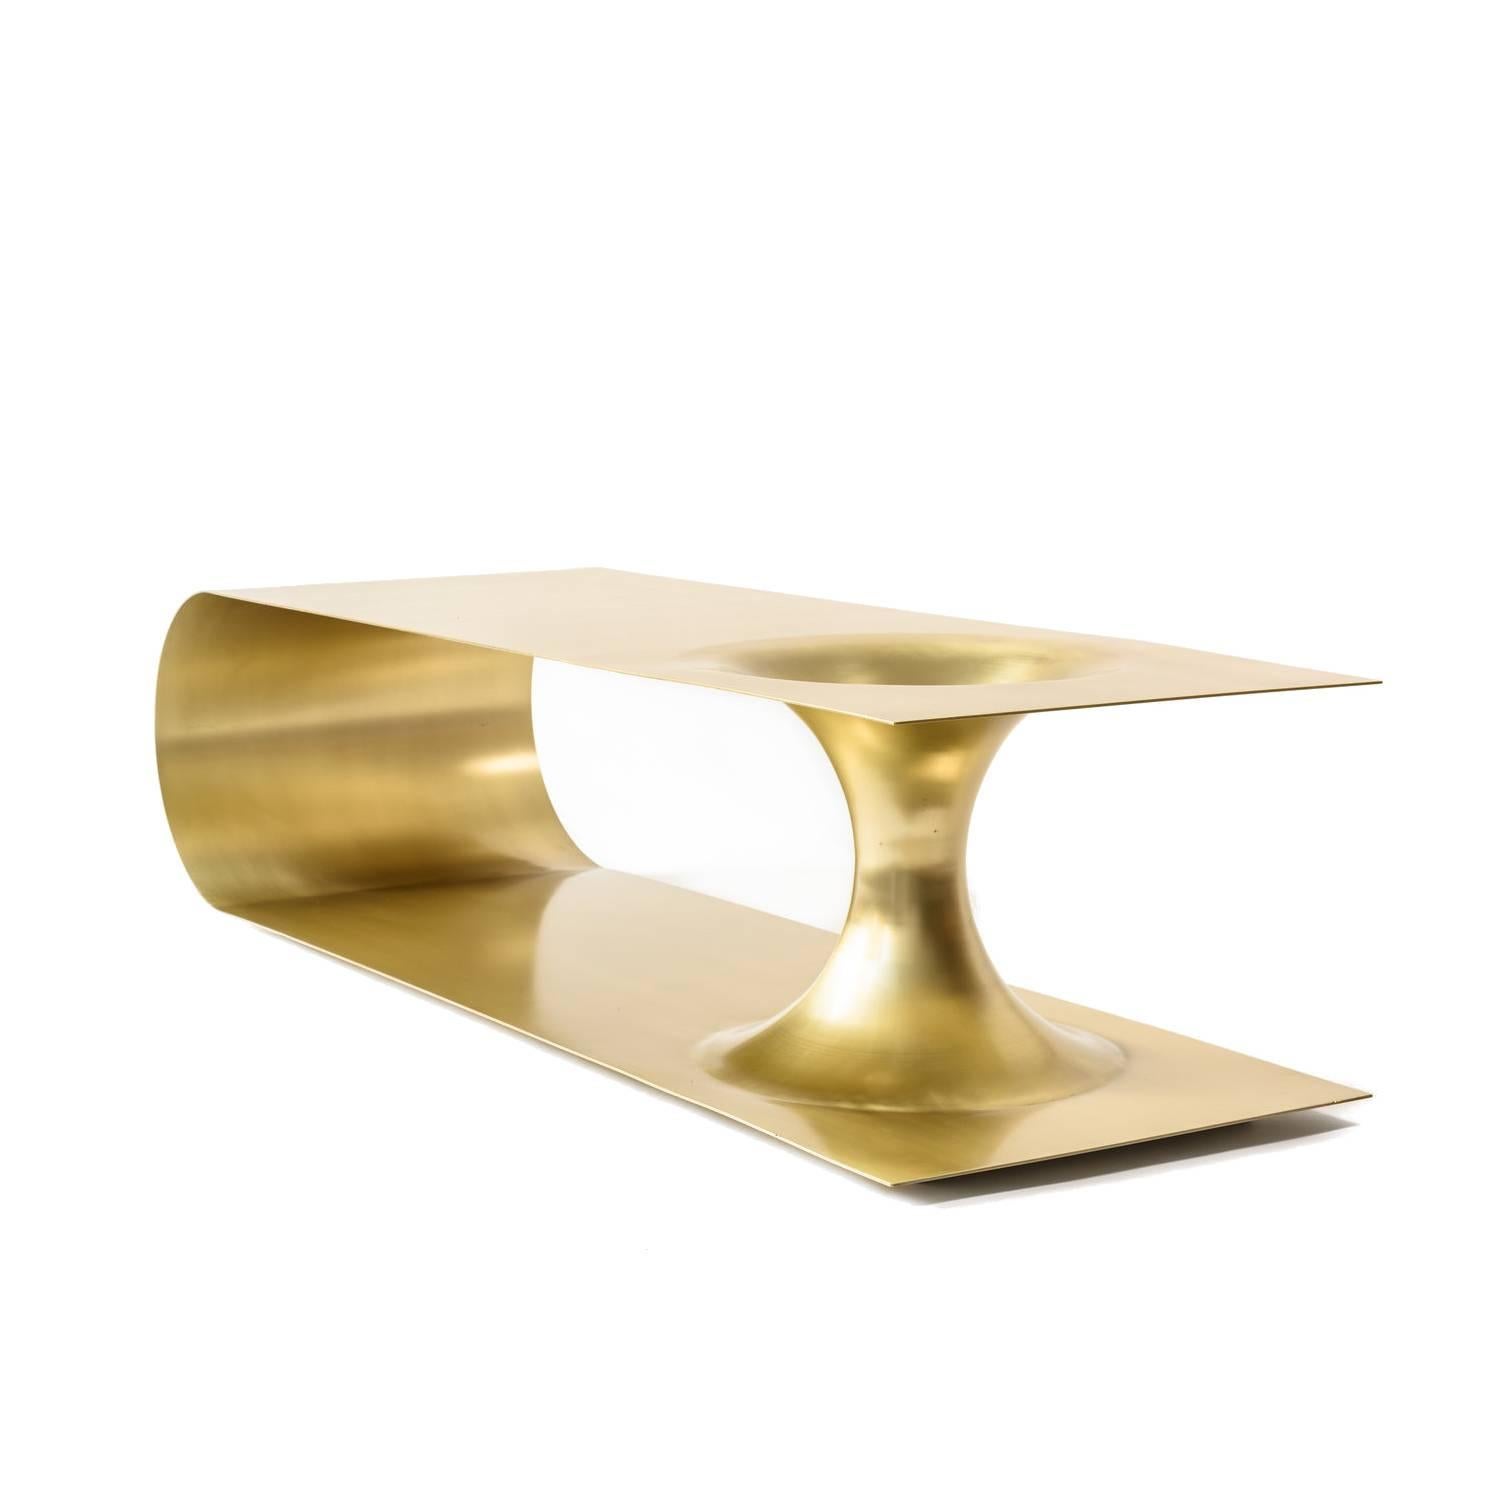 Not So General Gallery in Los Angeles is proud to present the Wormhole Coffee Table by Brooklyn-based Erickson Aesthetics which is constructed of brass-plated steel derives its name from the topological features that represent the shortcut between